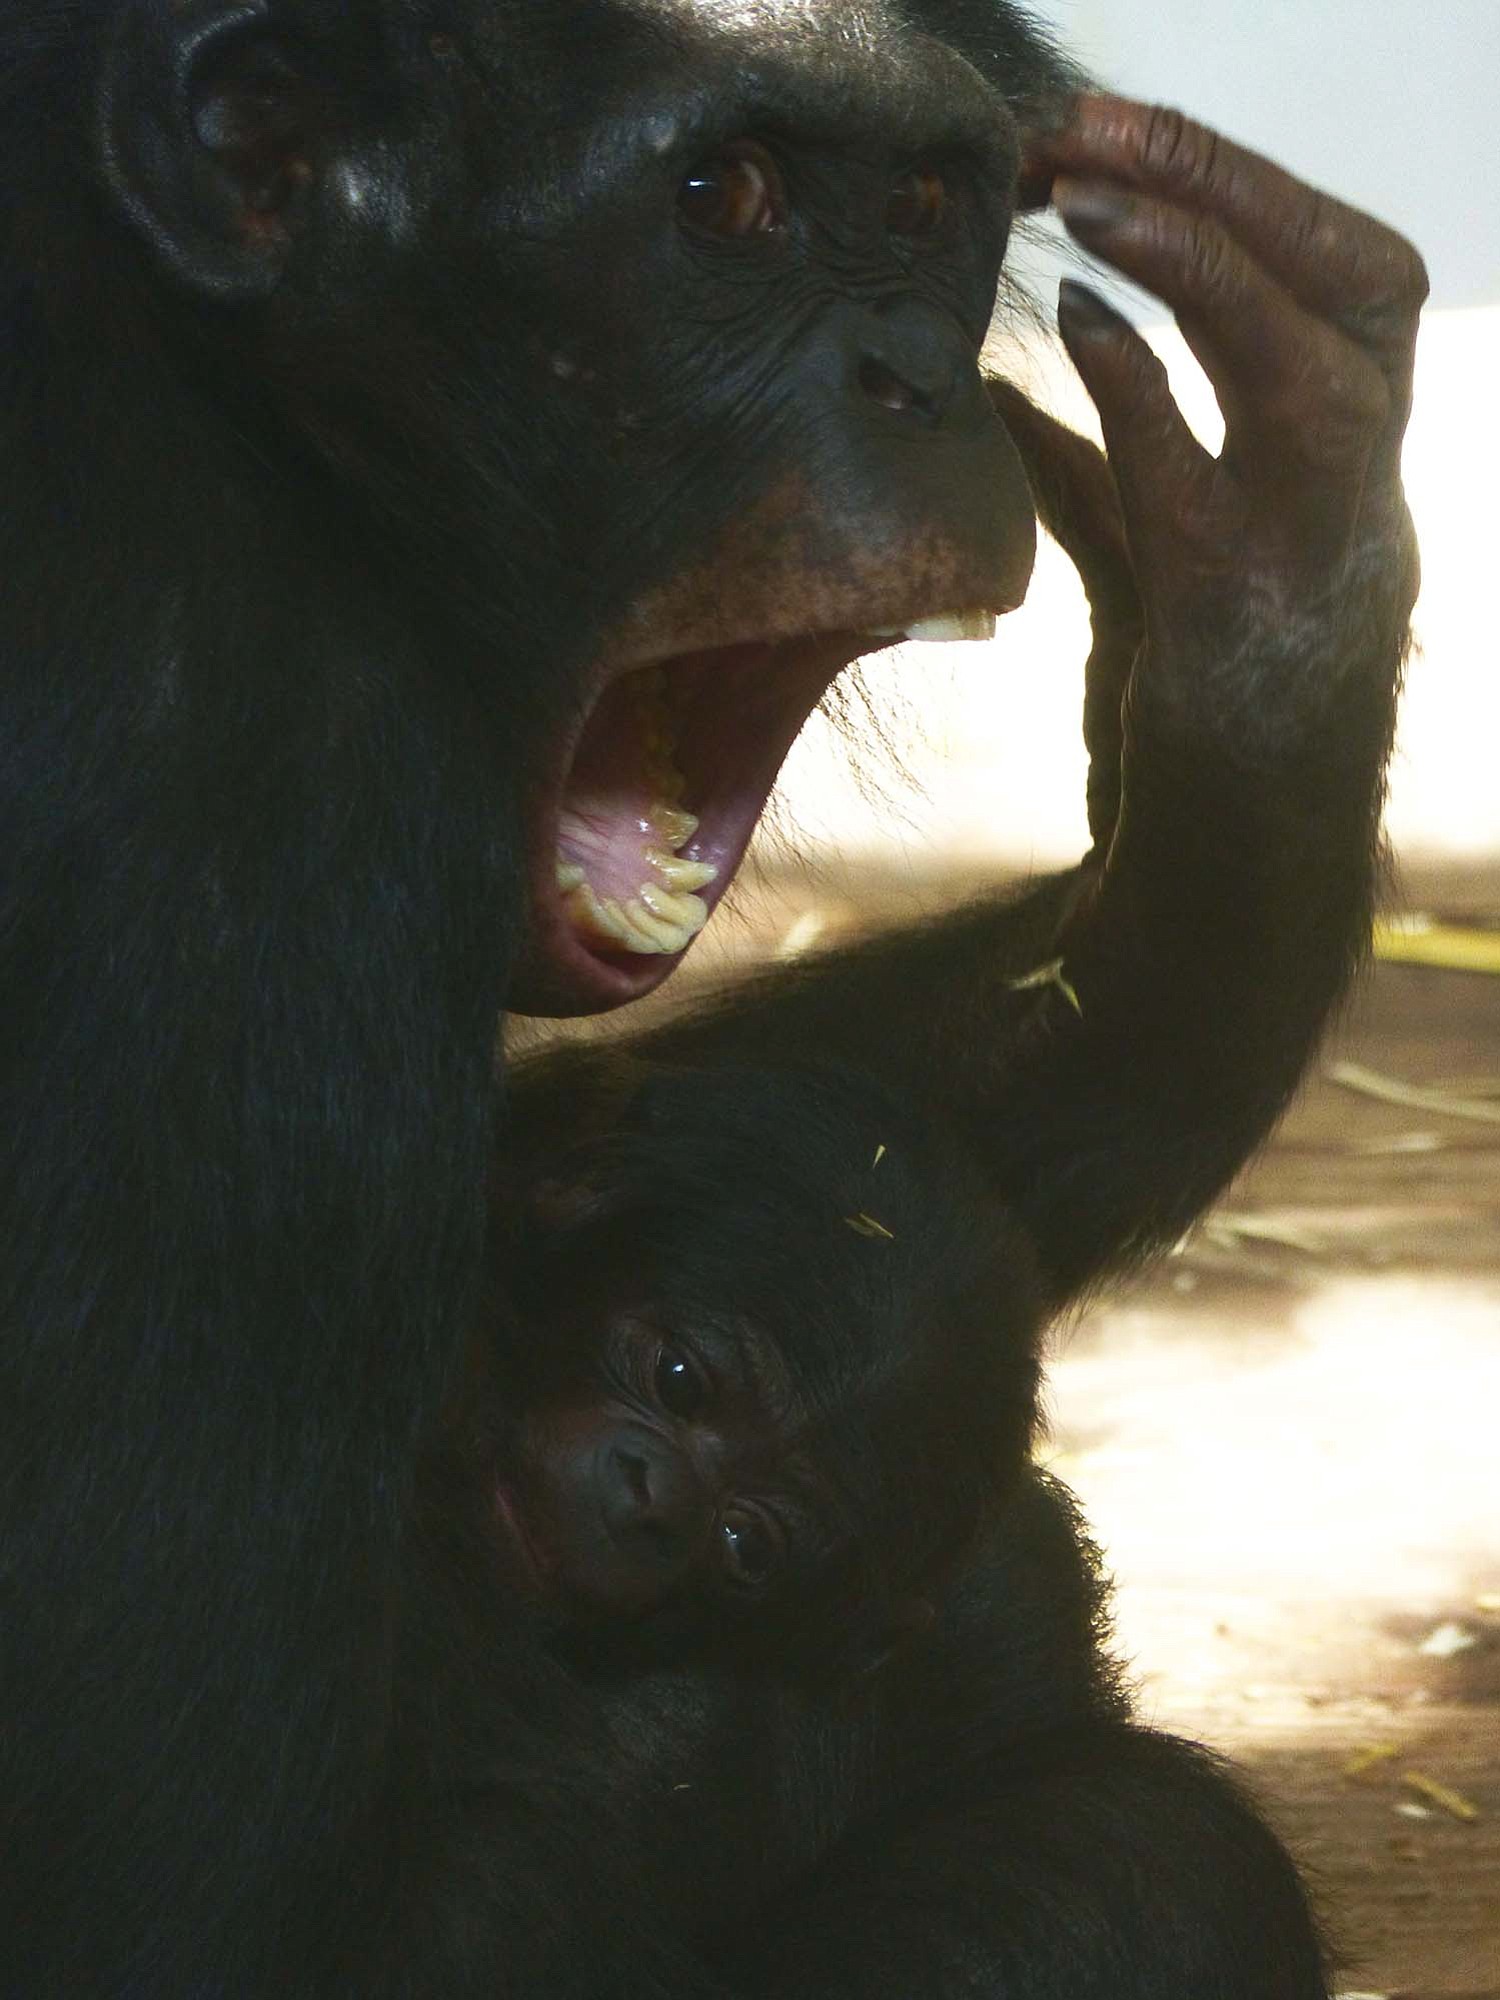 Yawn contagion is a form of empathy, and it turns out the bonobo is just like us.